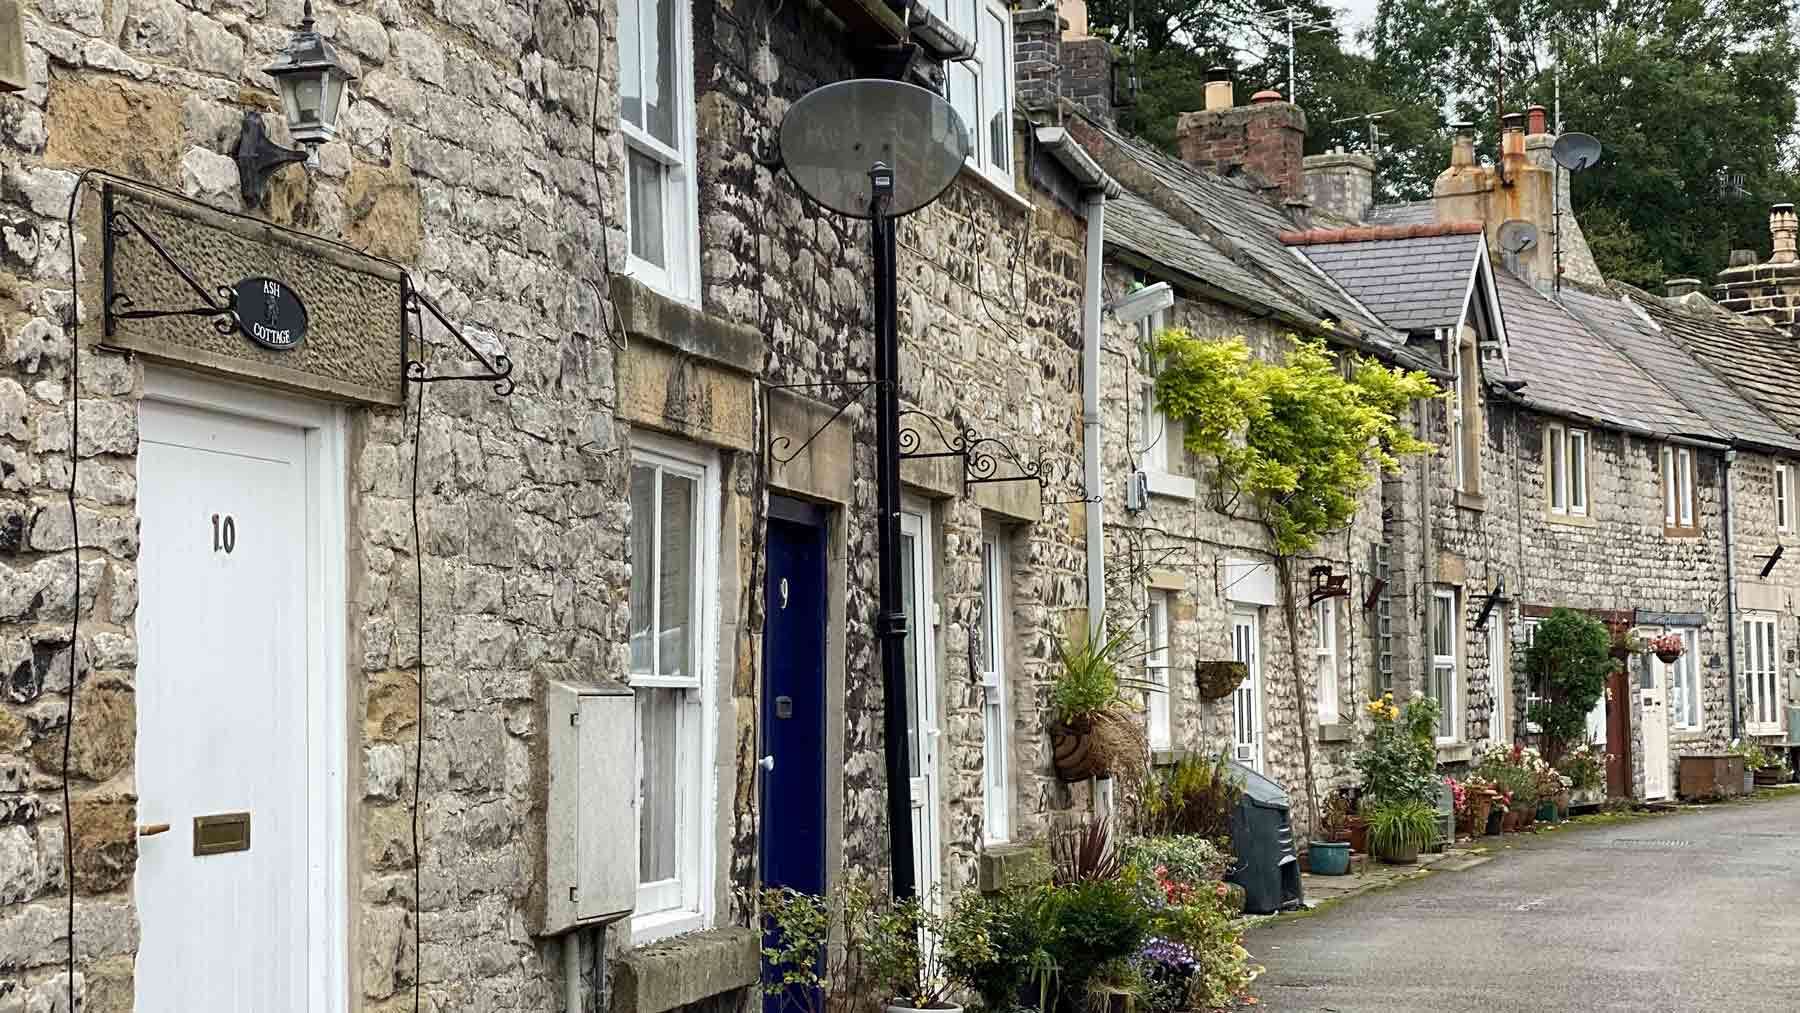 Pretty grey stone cottages in Tidewell, Peak District